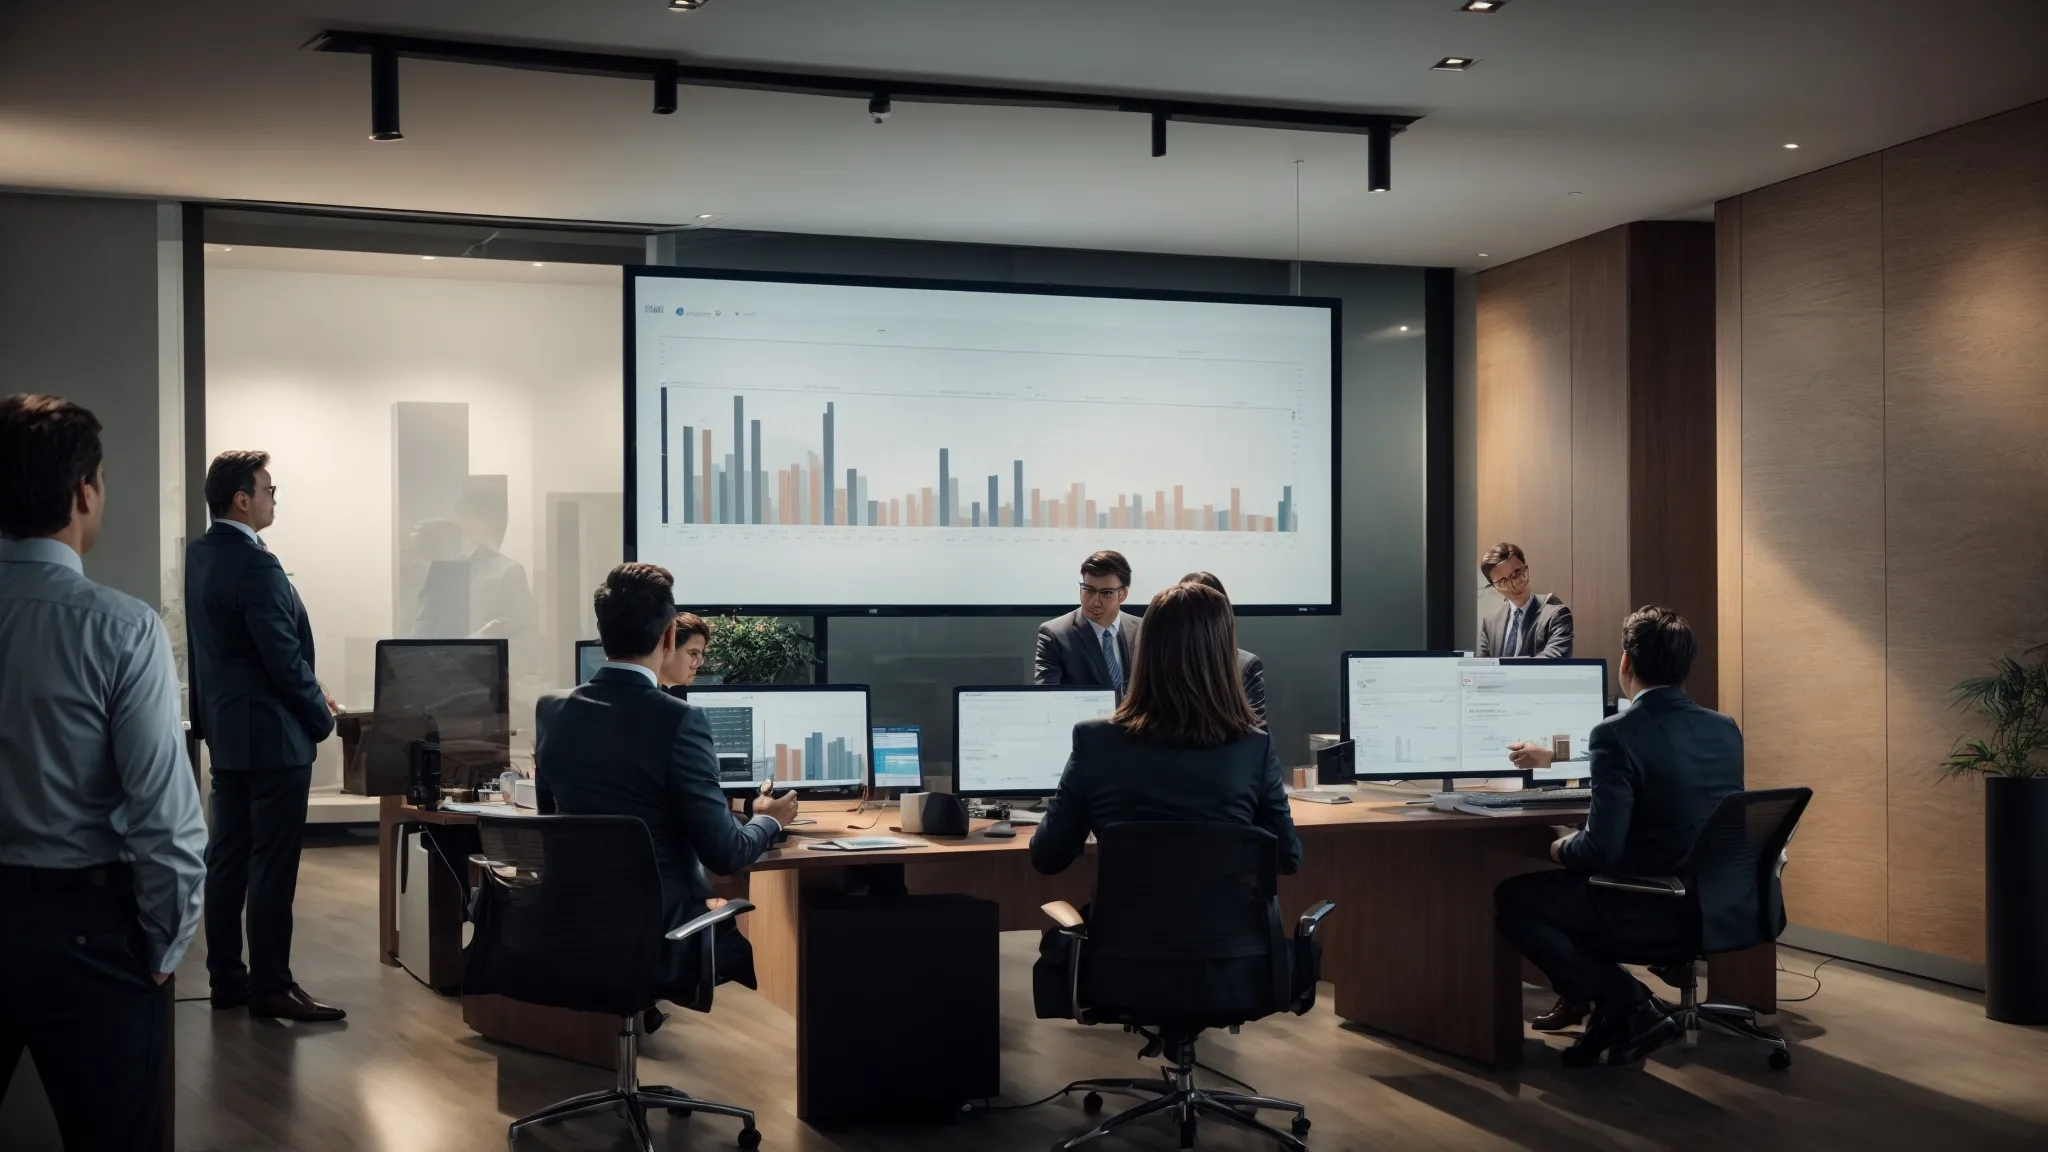 a group of business professionals analyzing a large graph on a screen in a modern office setting.